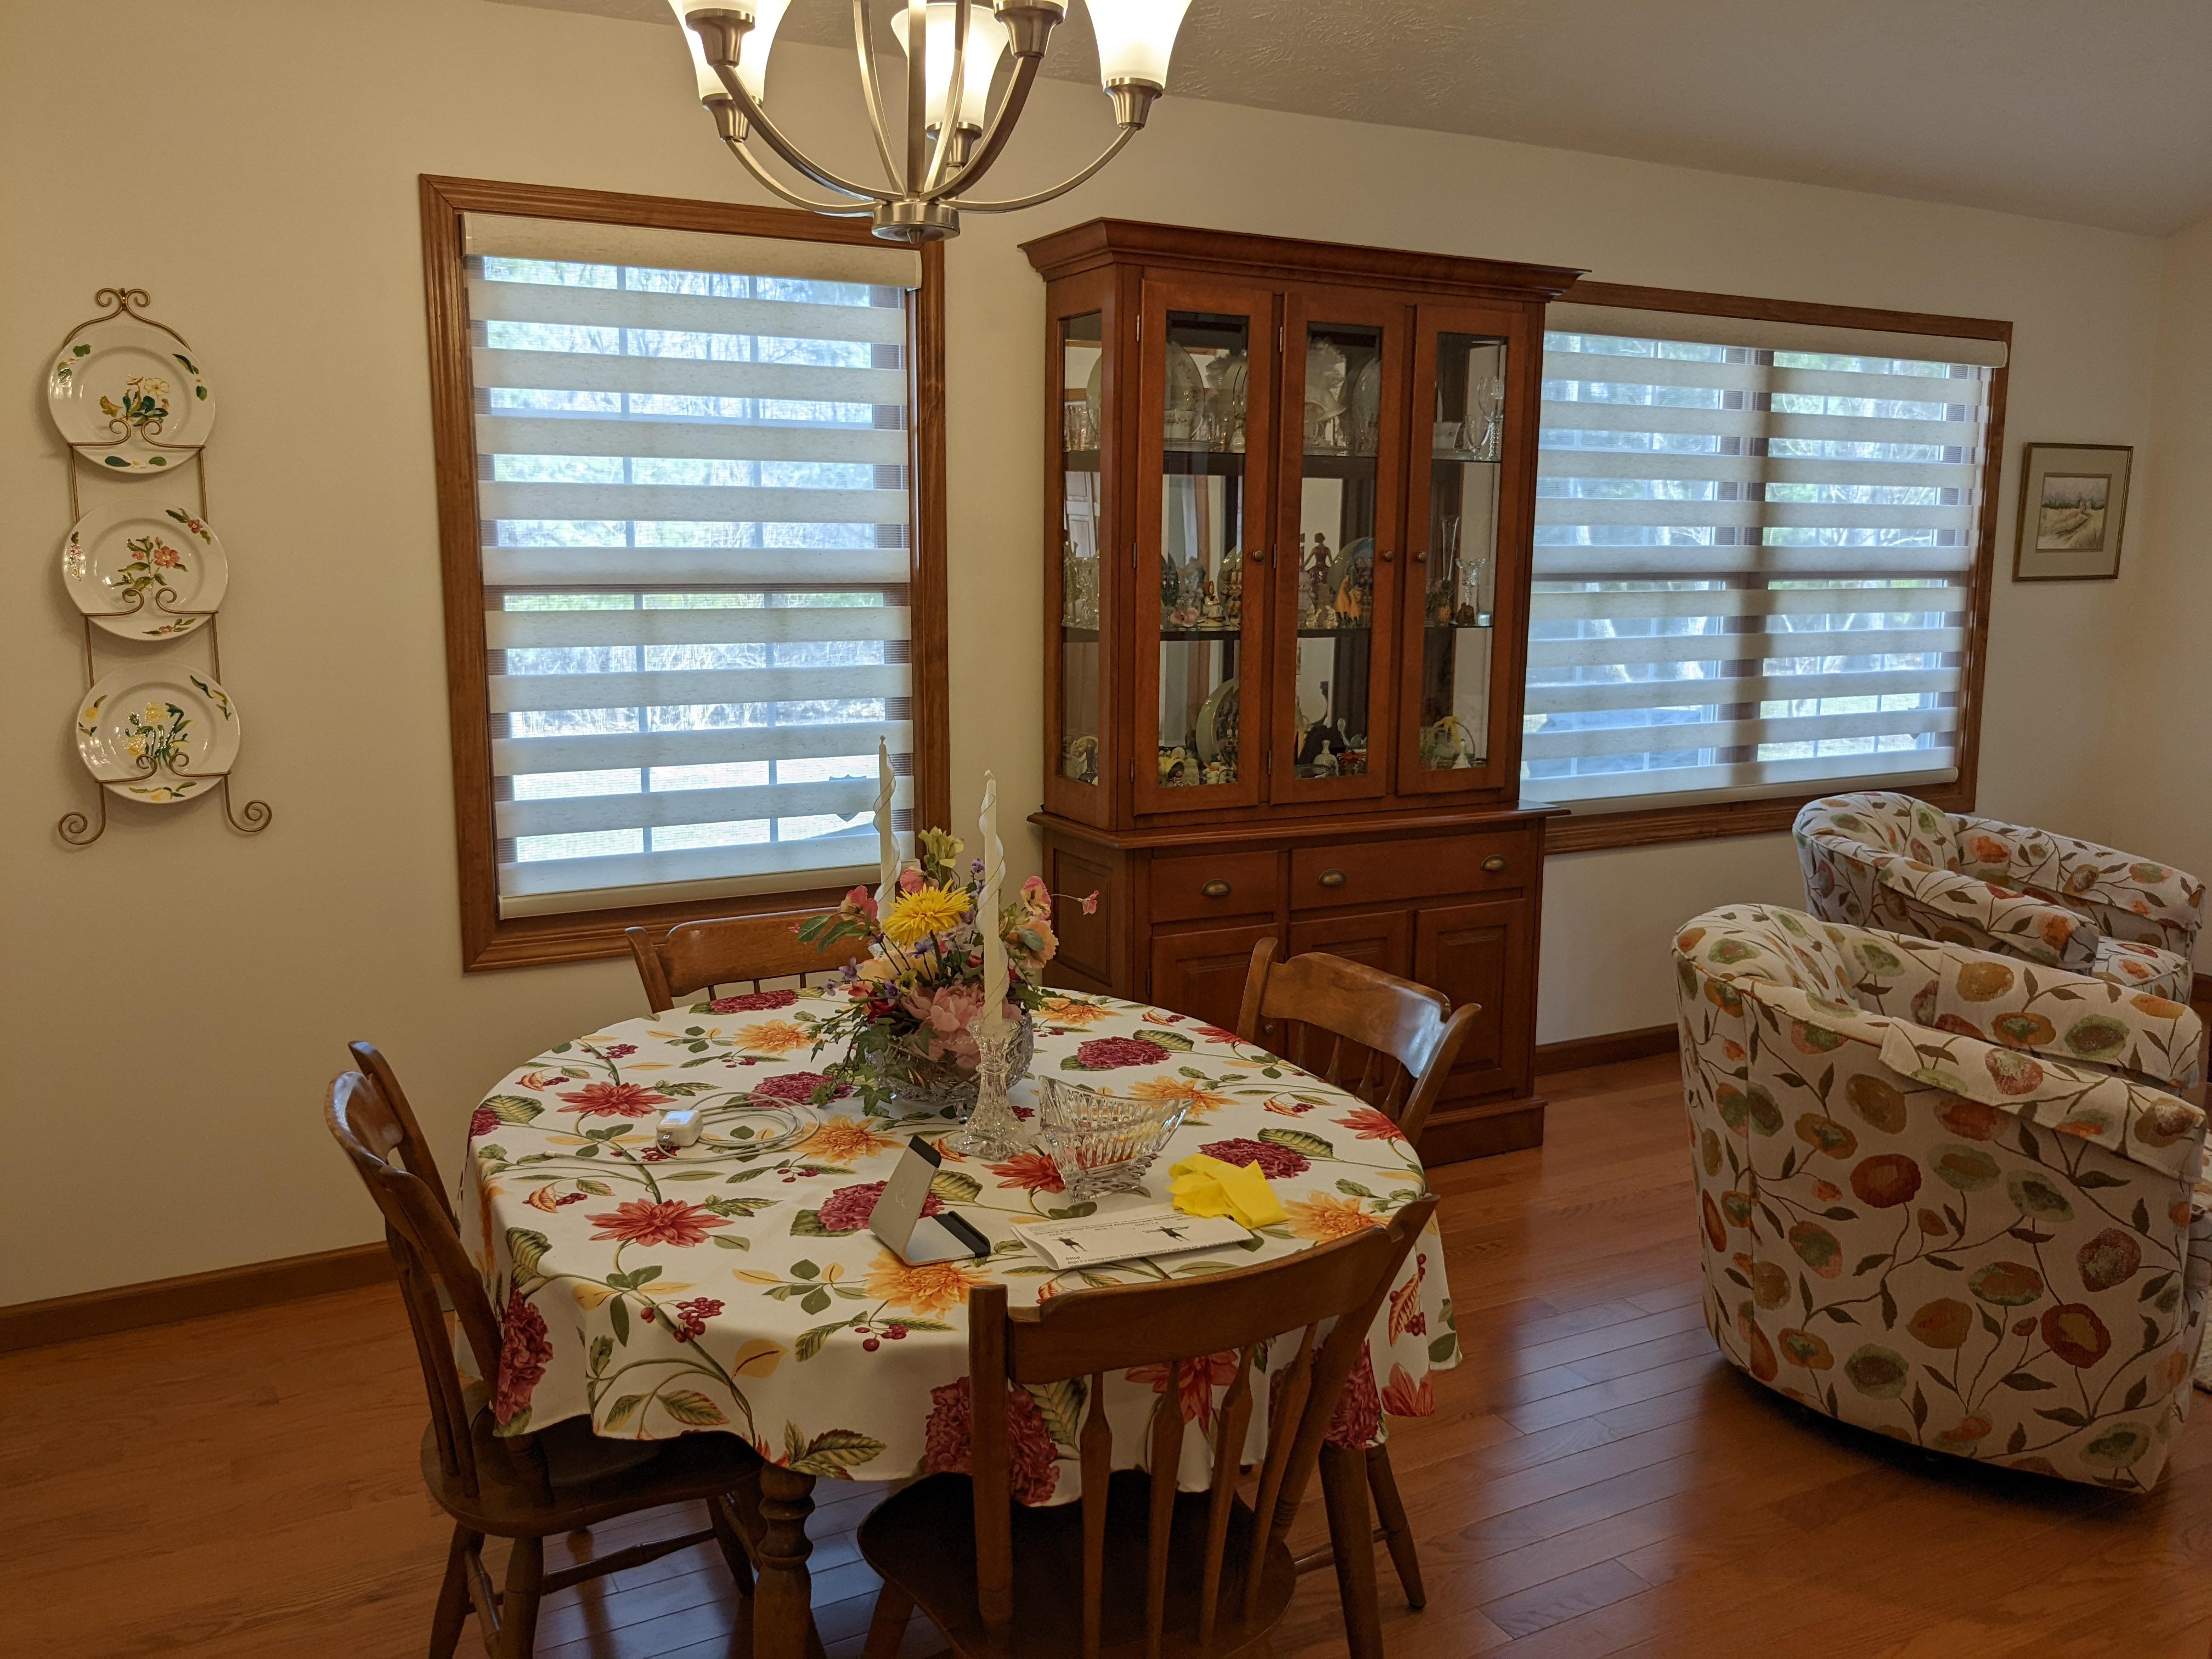 Cordless dual sheer (zebra) shades in Springfield Illinois living room.  BudgetBlinds  WindowCoverings  Shades